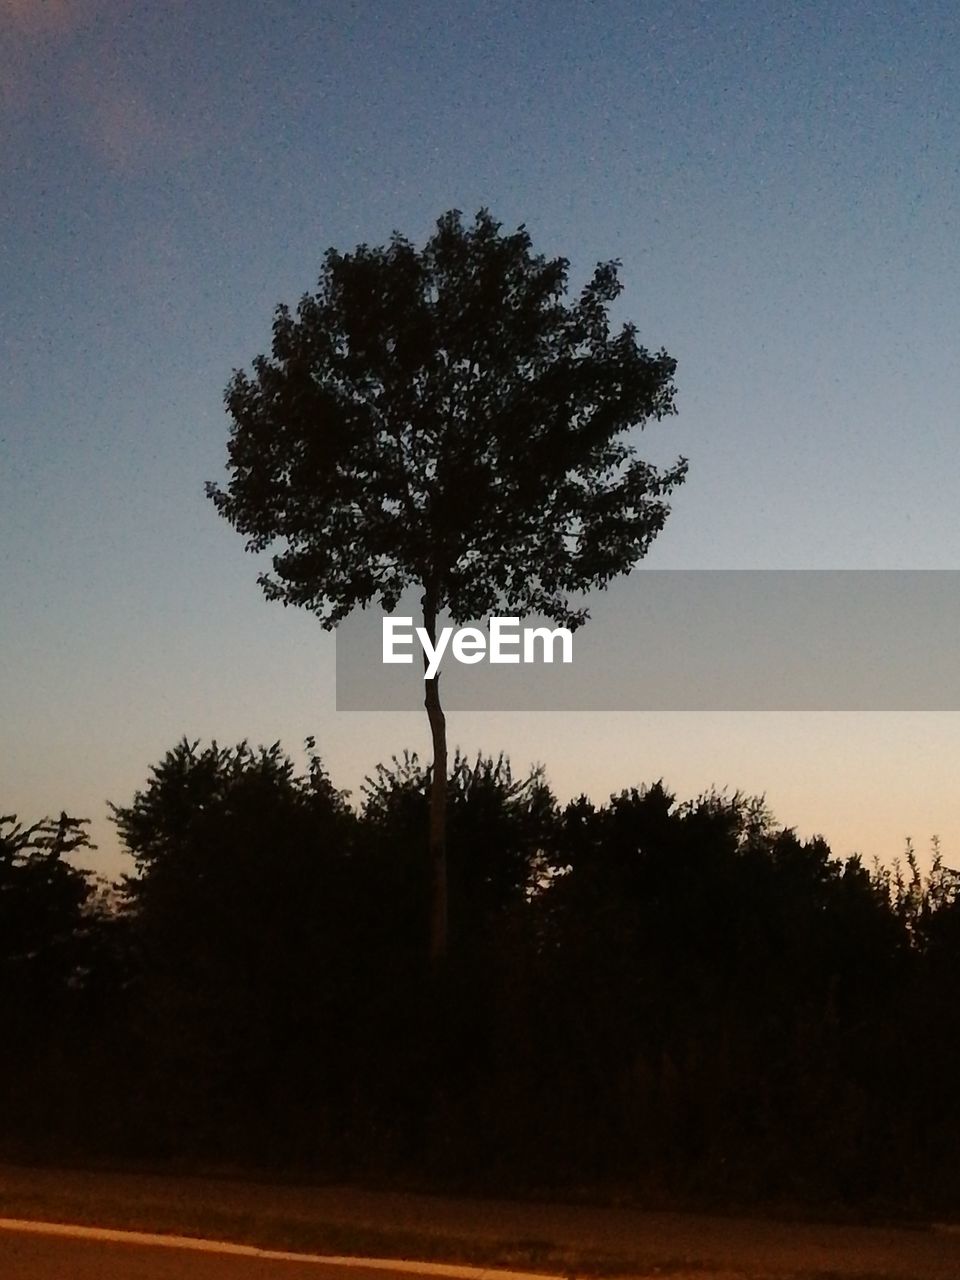 SILHOUETTE TREE ON FIELD AGAINST CLEAR SKY AT DUSK